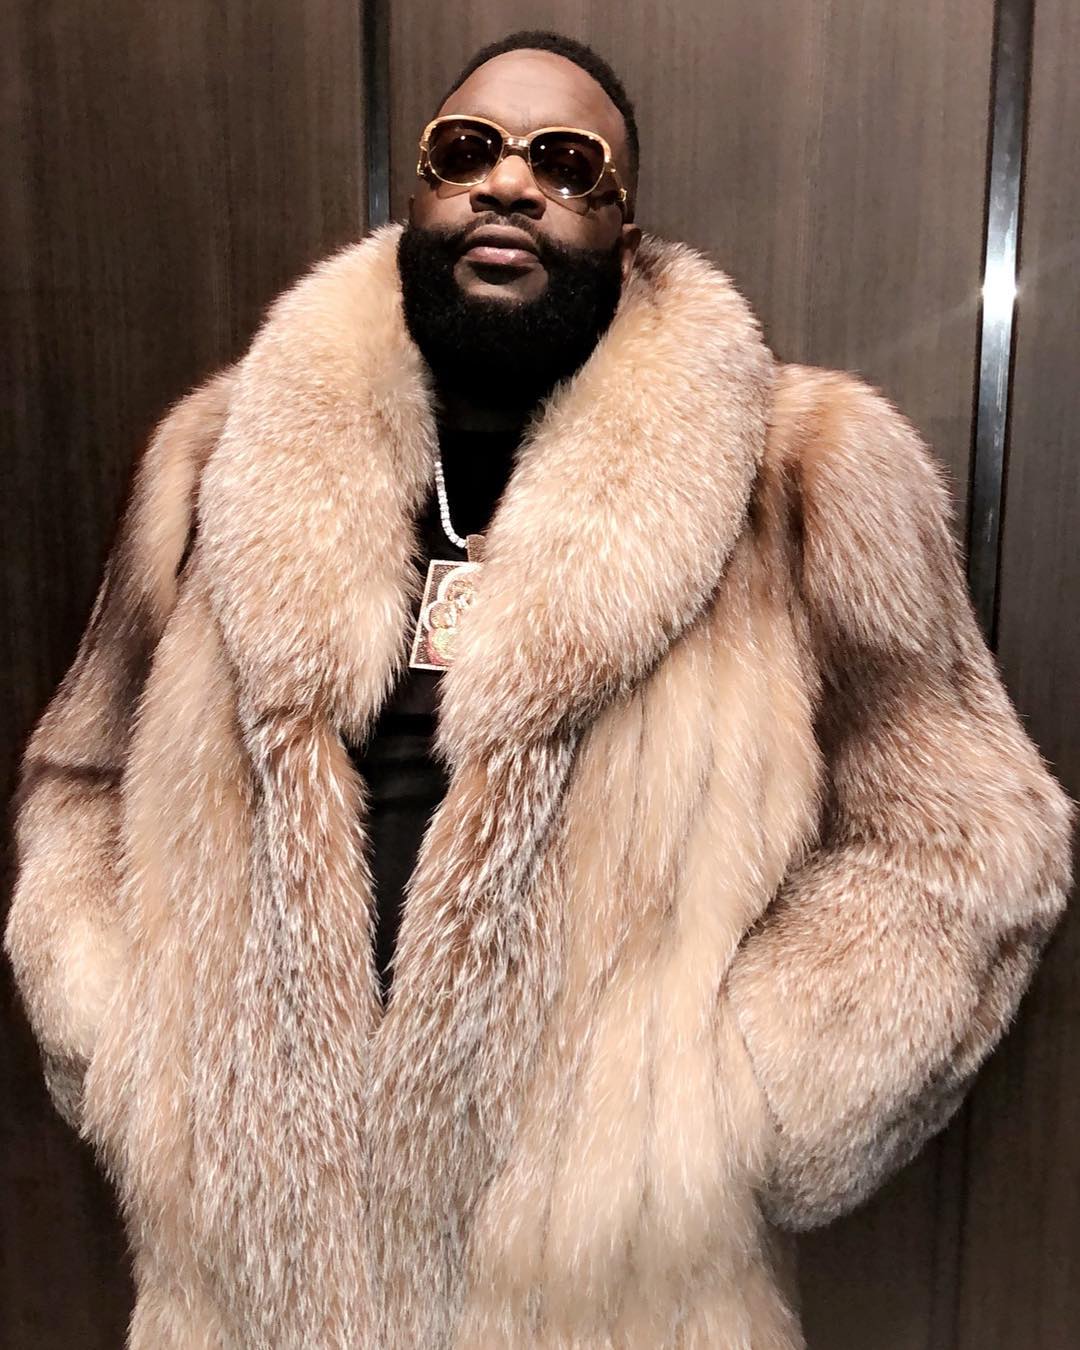 Rapper Rick Ross hospitalized with heart attack